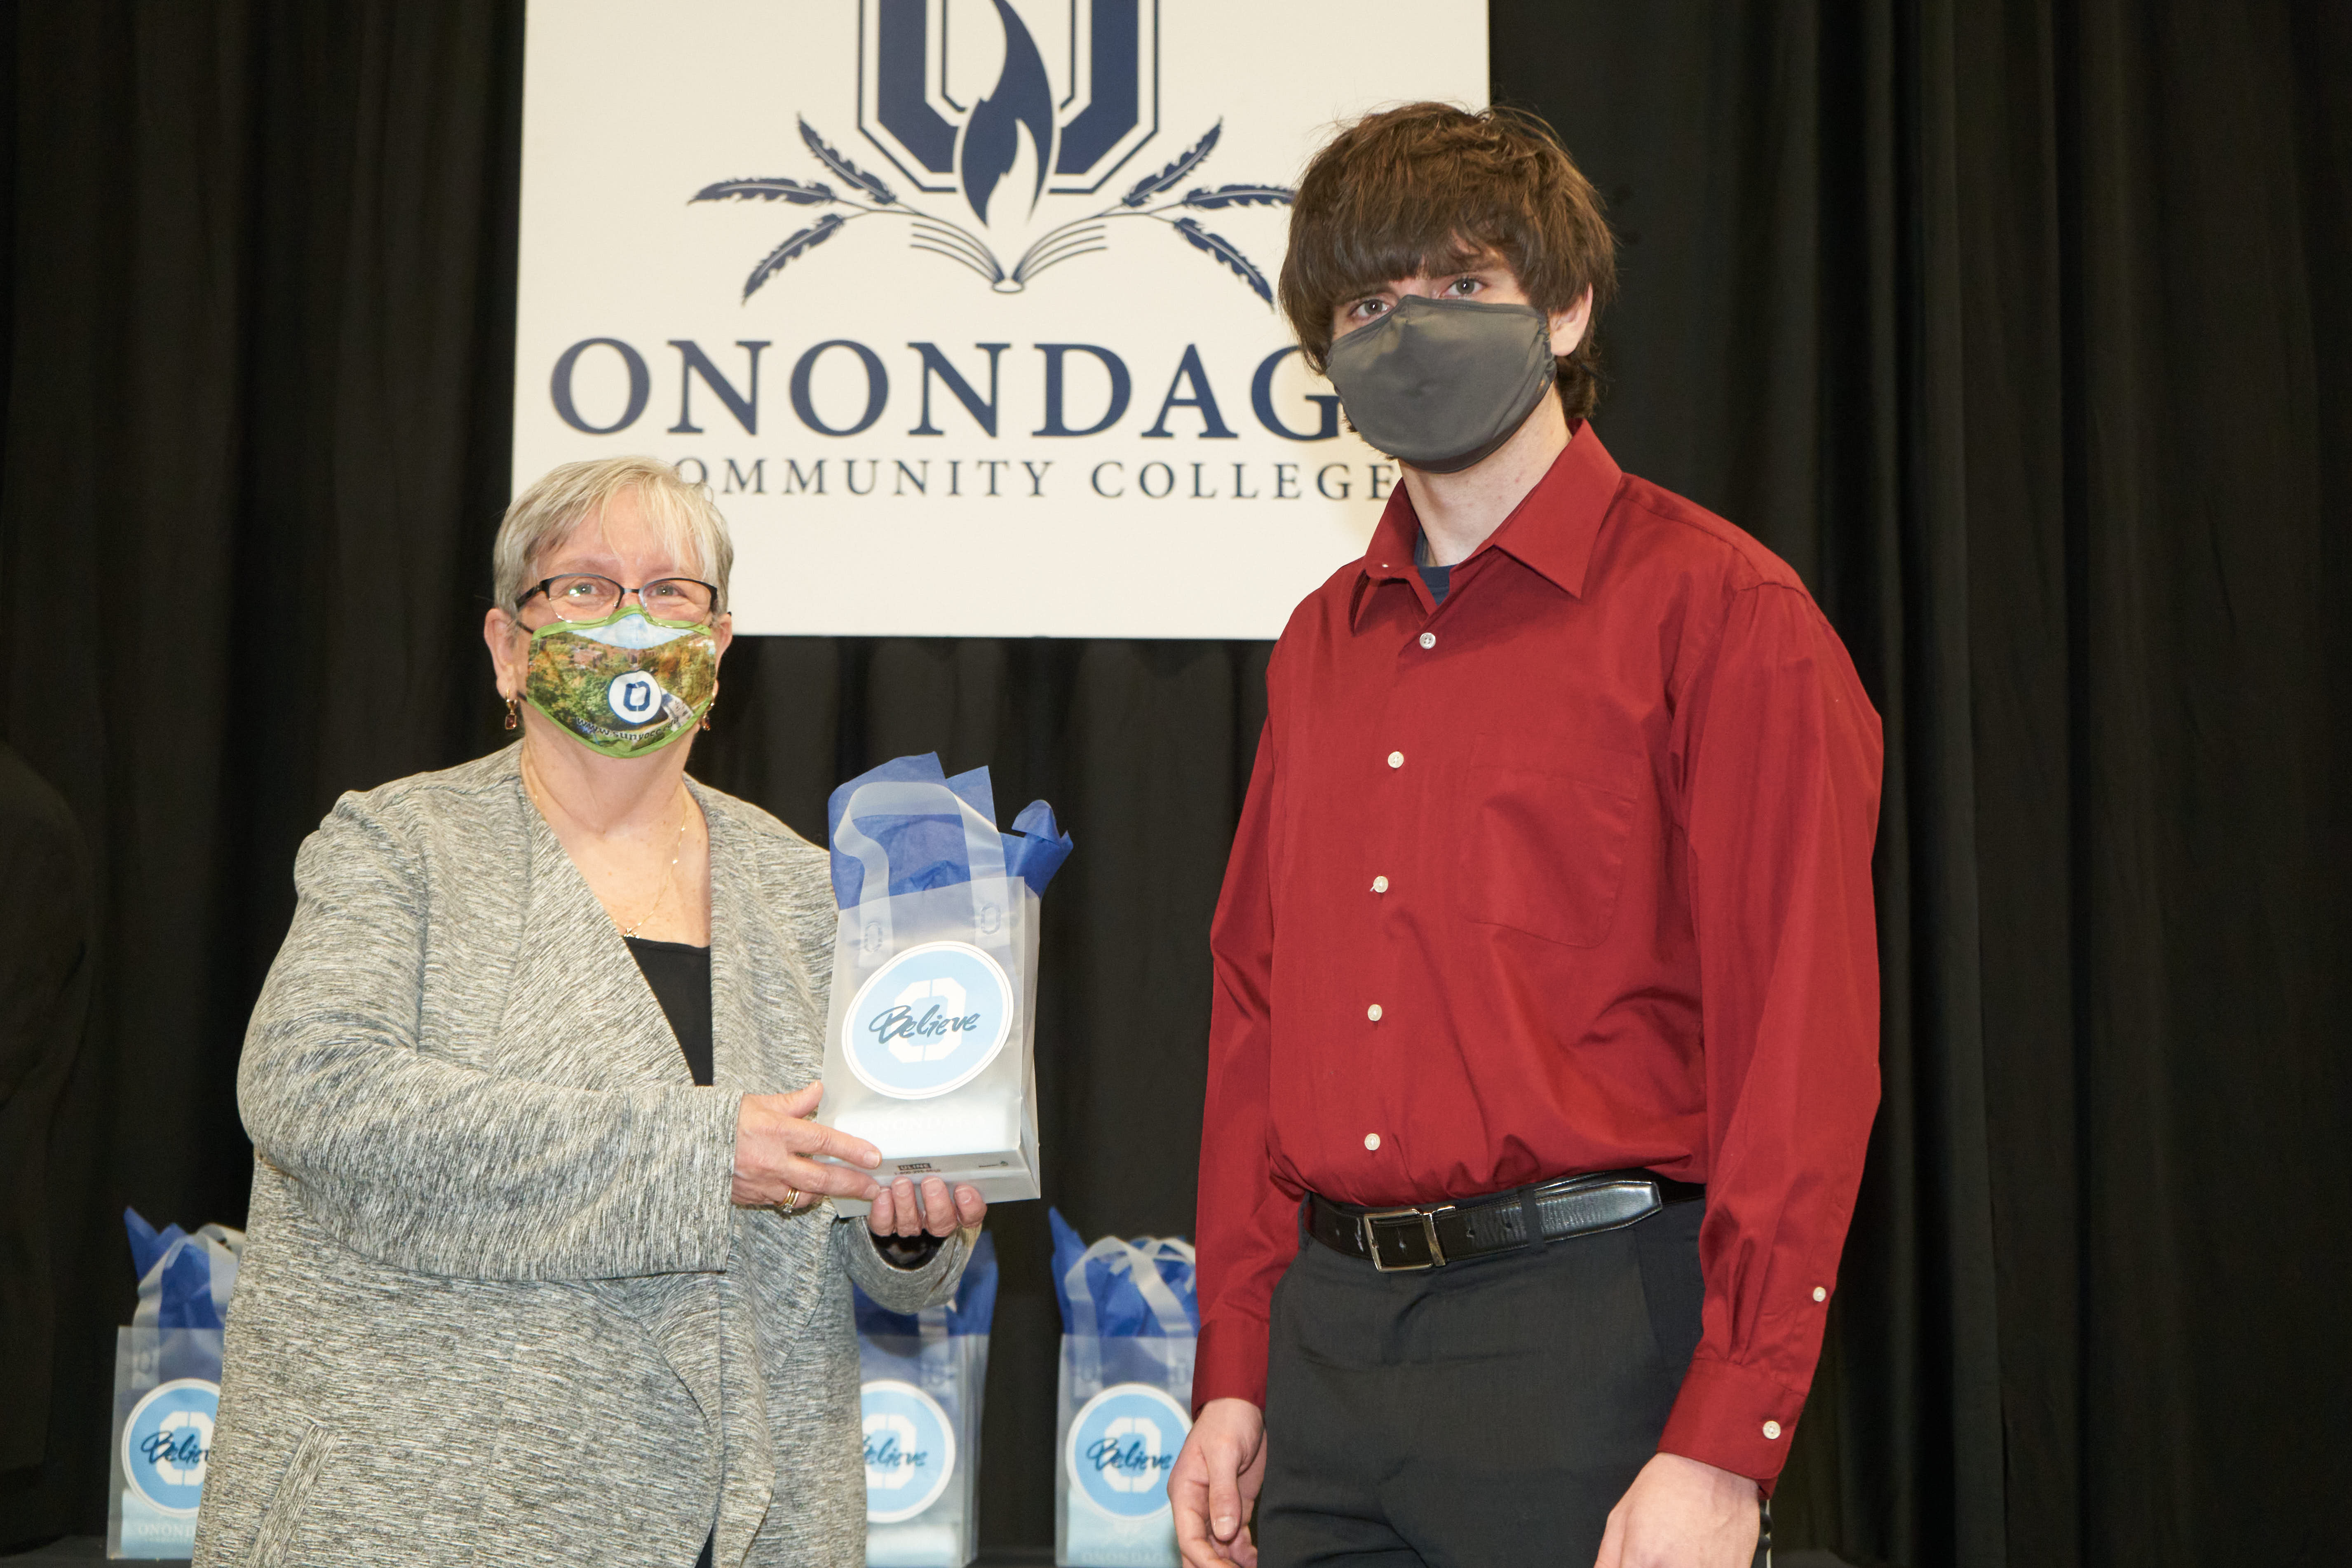 General Studies Curriculum Honoree Matthew Winoski (right) is pictured with OCC President Dr. Casey Crabill (left).